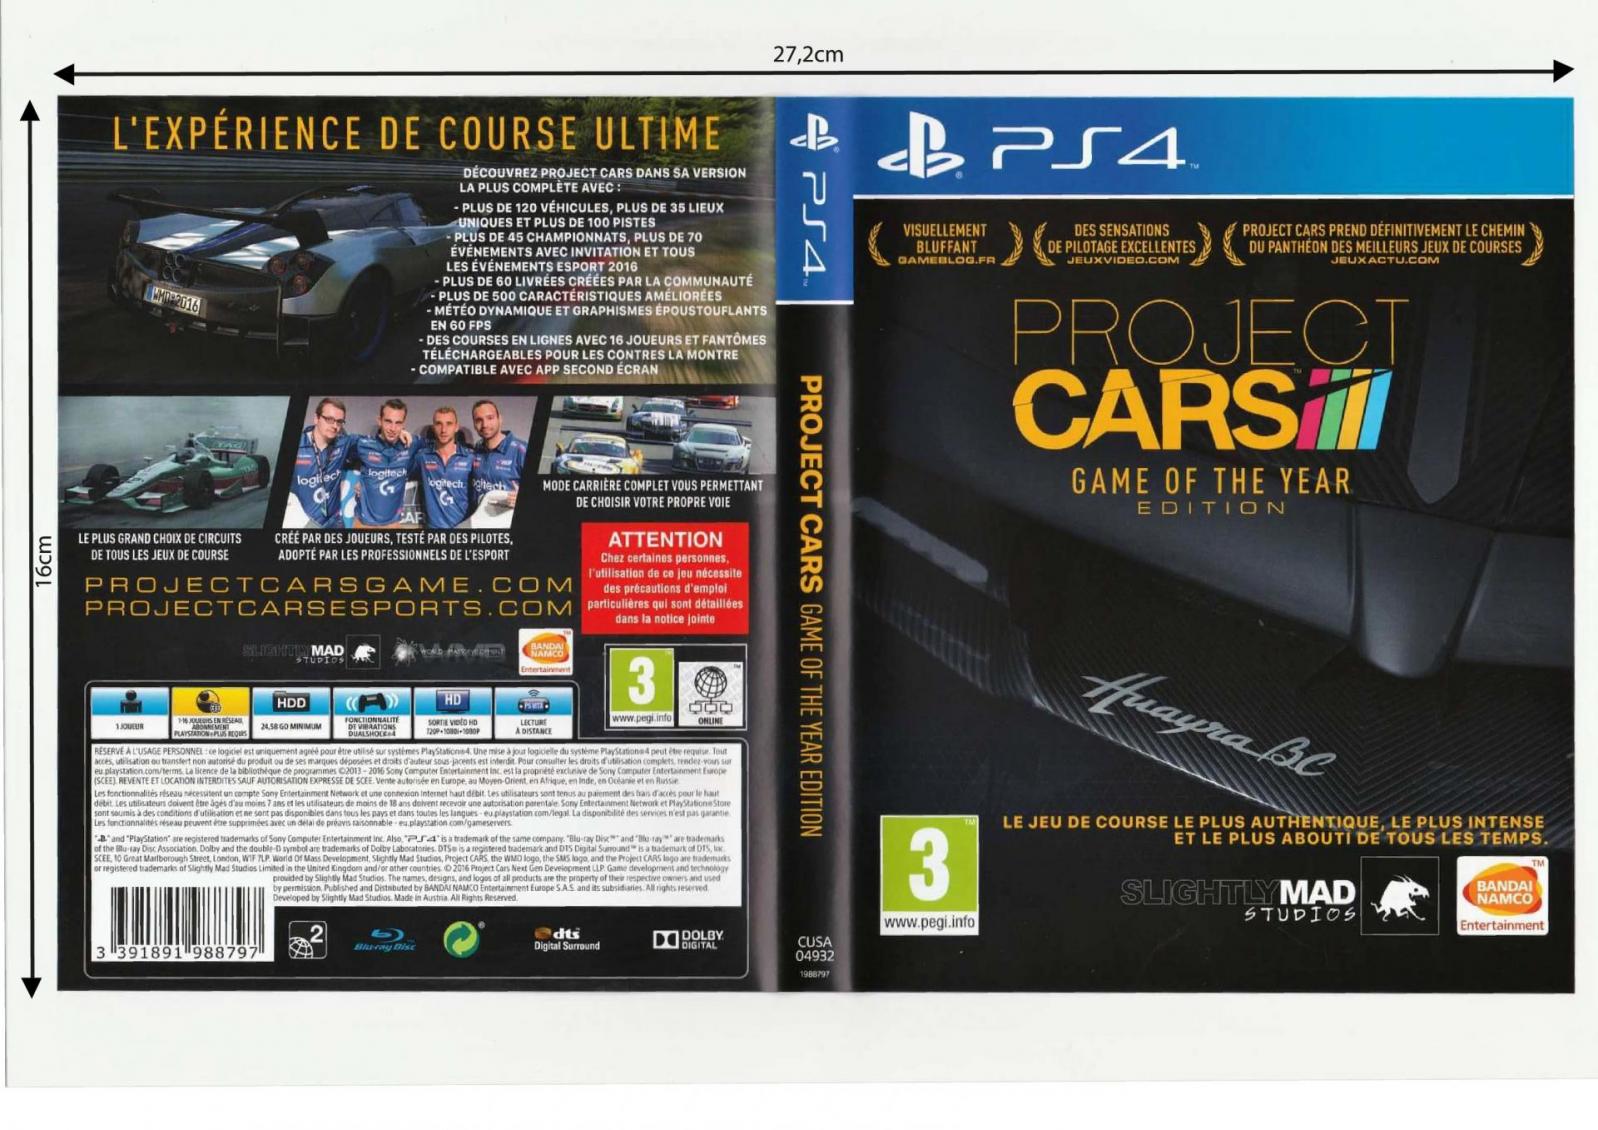 Project cars 4 game of the year